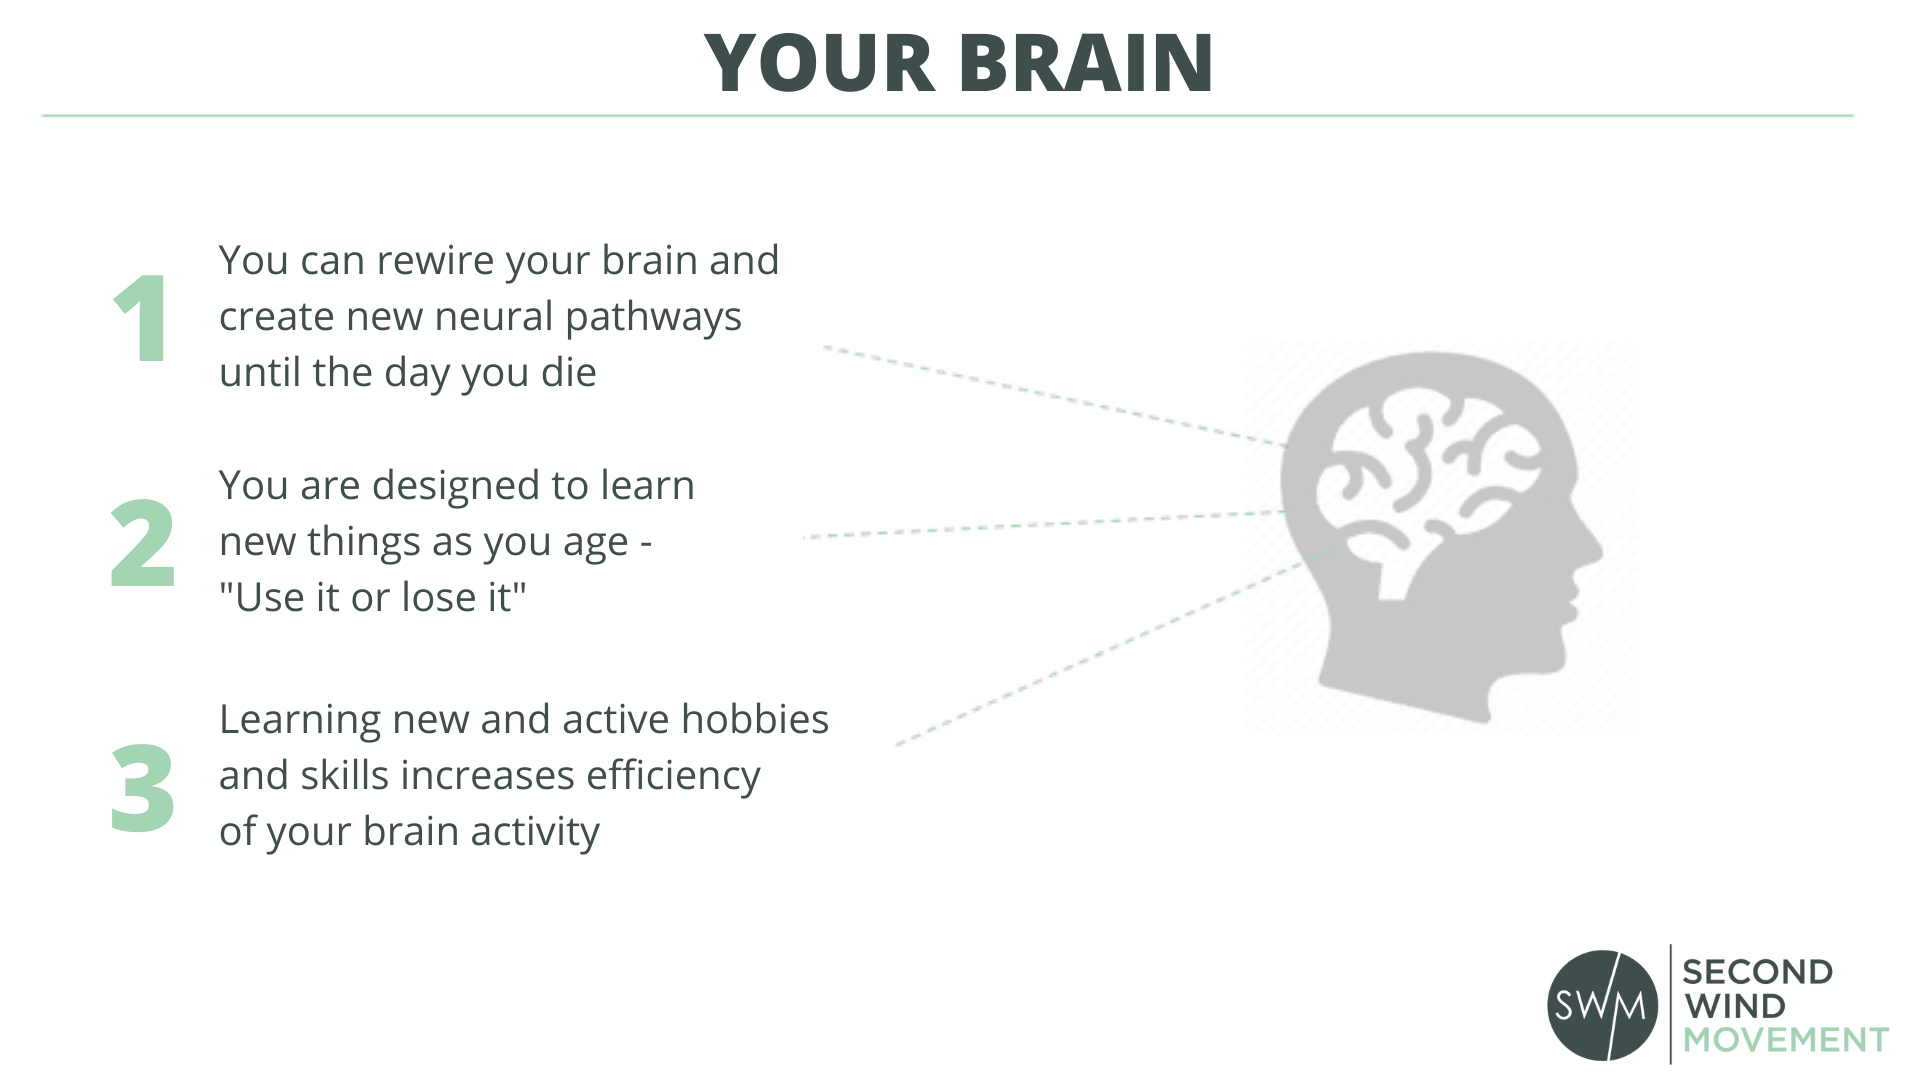 your brain was designed for lifelong learning and growth